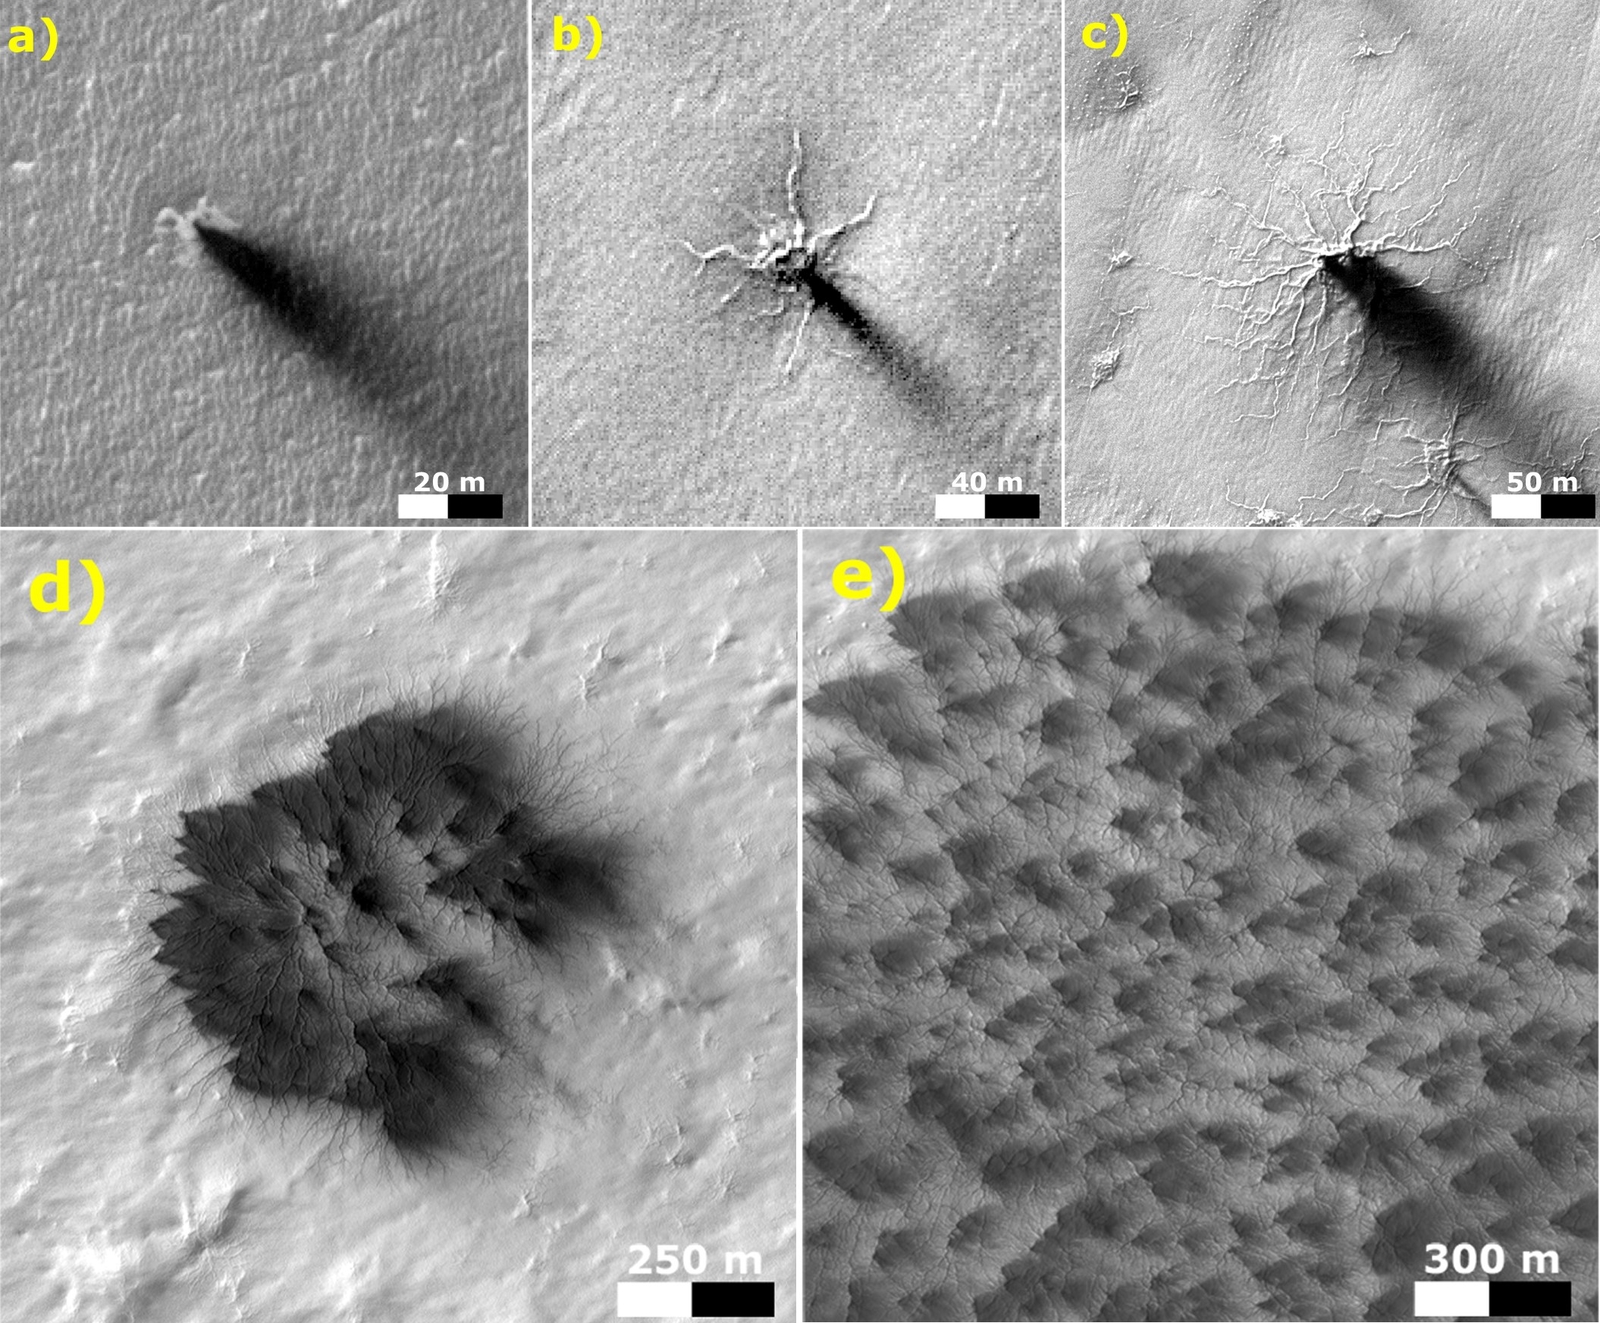 Possible Development Stages of Martian 'Spiders'